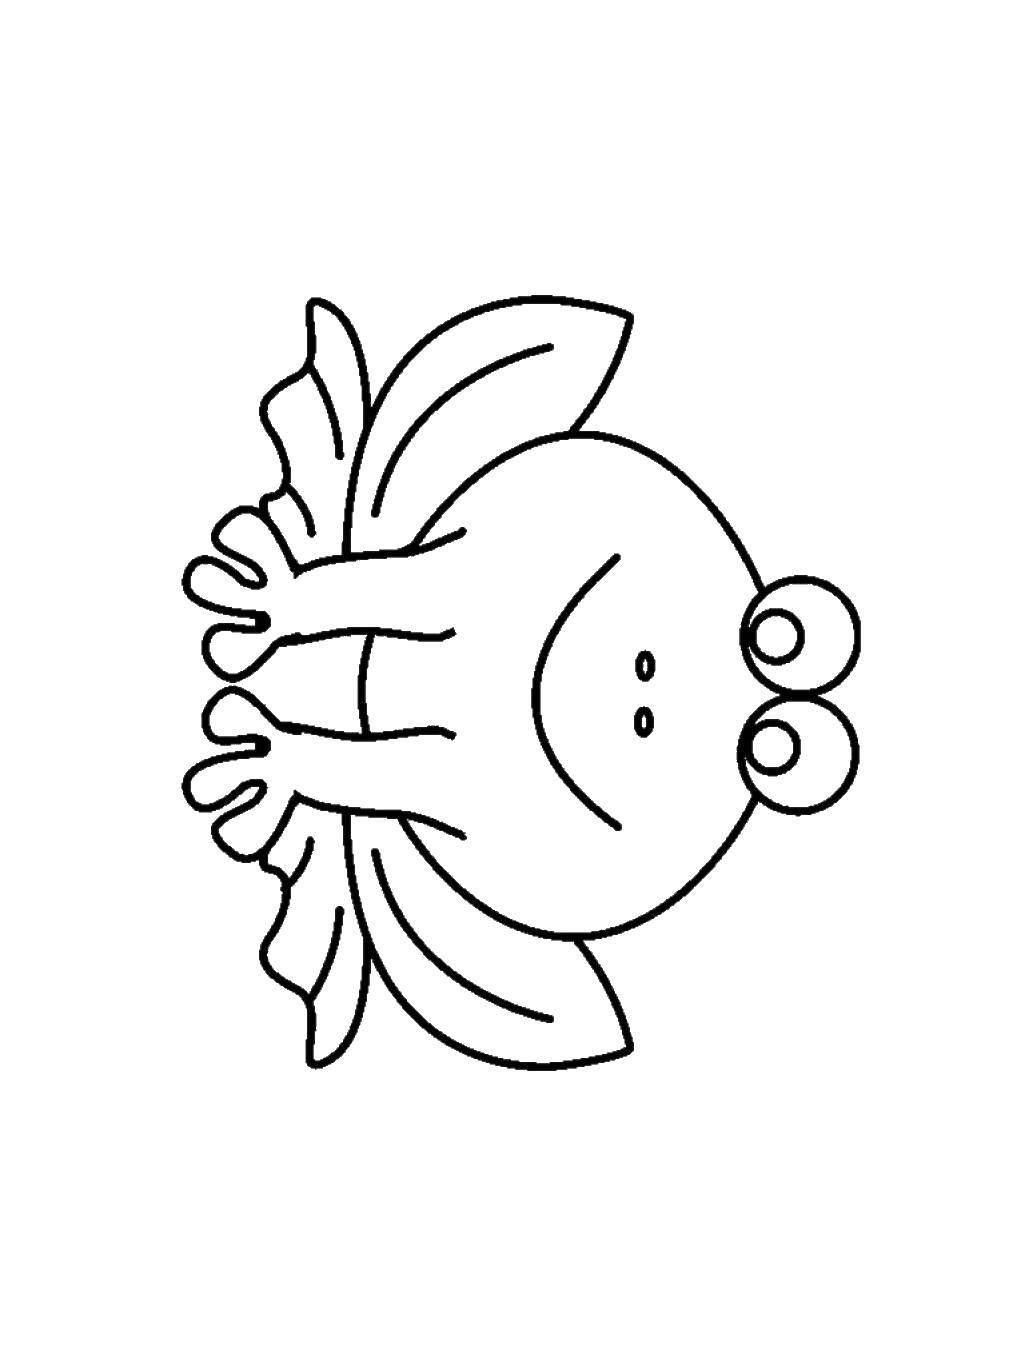 Coloring Frog with big eyes. Category simple coloring. Tags:  the frog, paws, eyes.